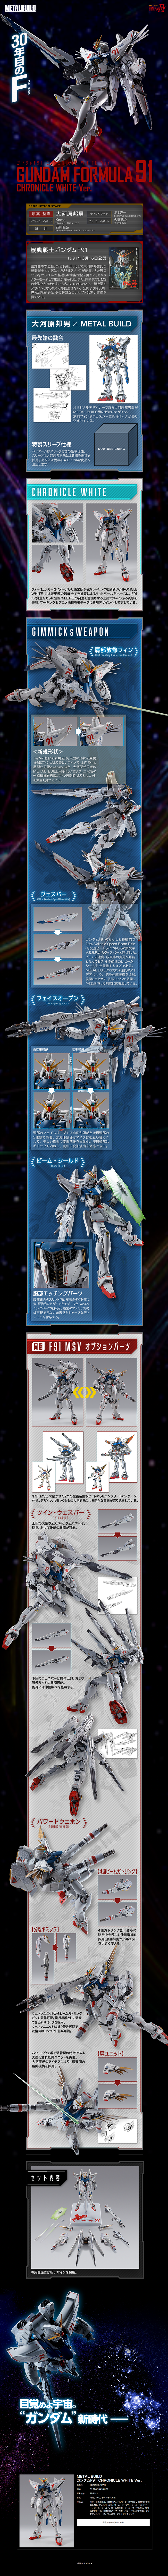 METAL BUILD ガンダムF91 CHRONICLE WHITE Ver_pc_1